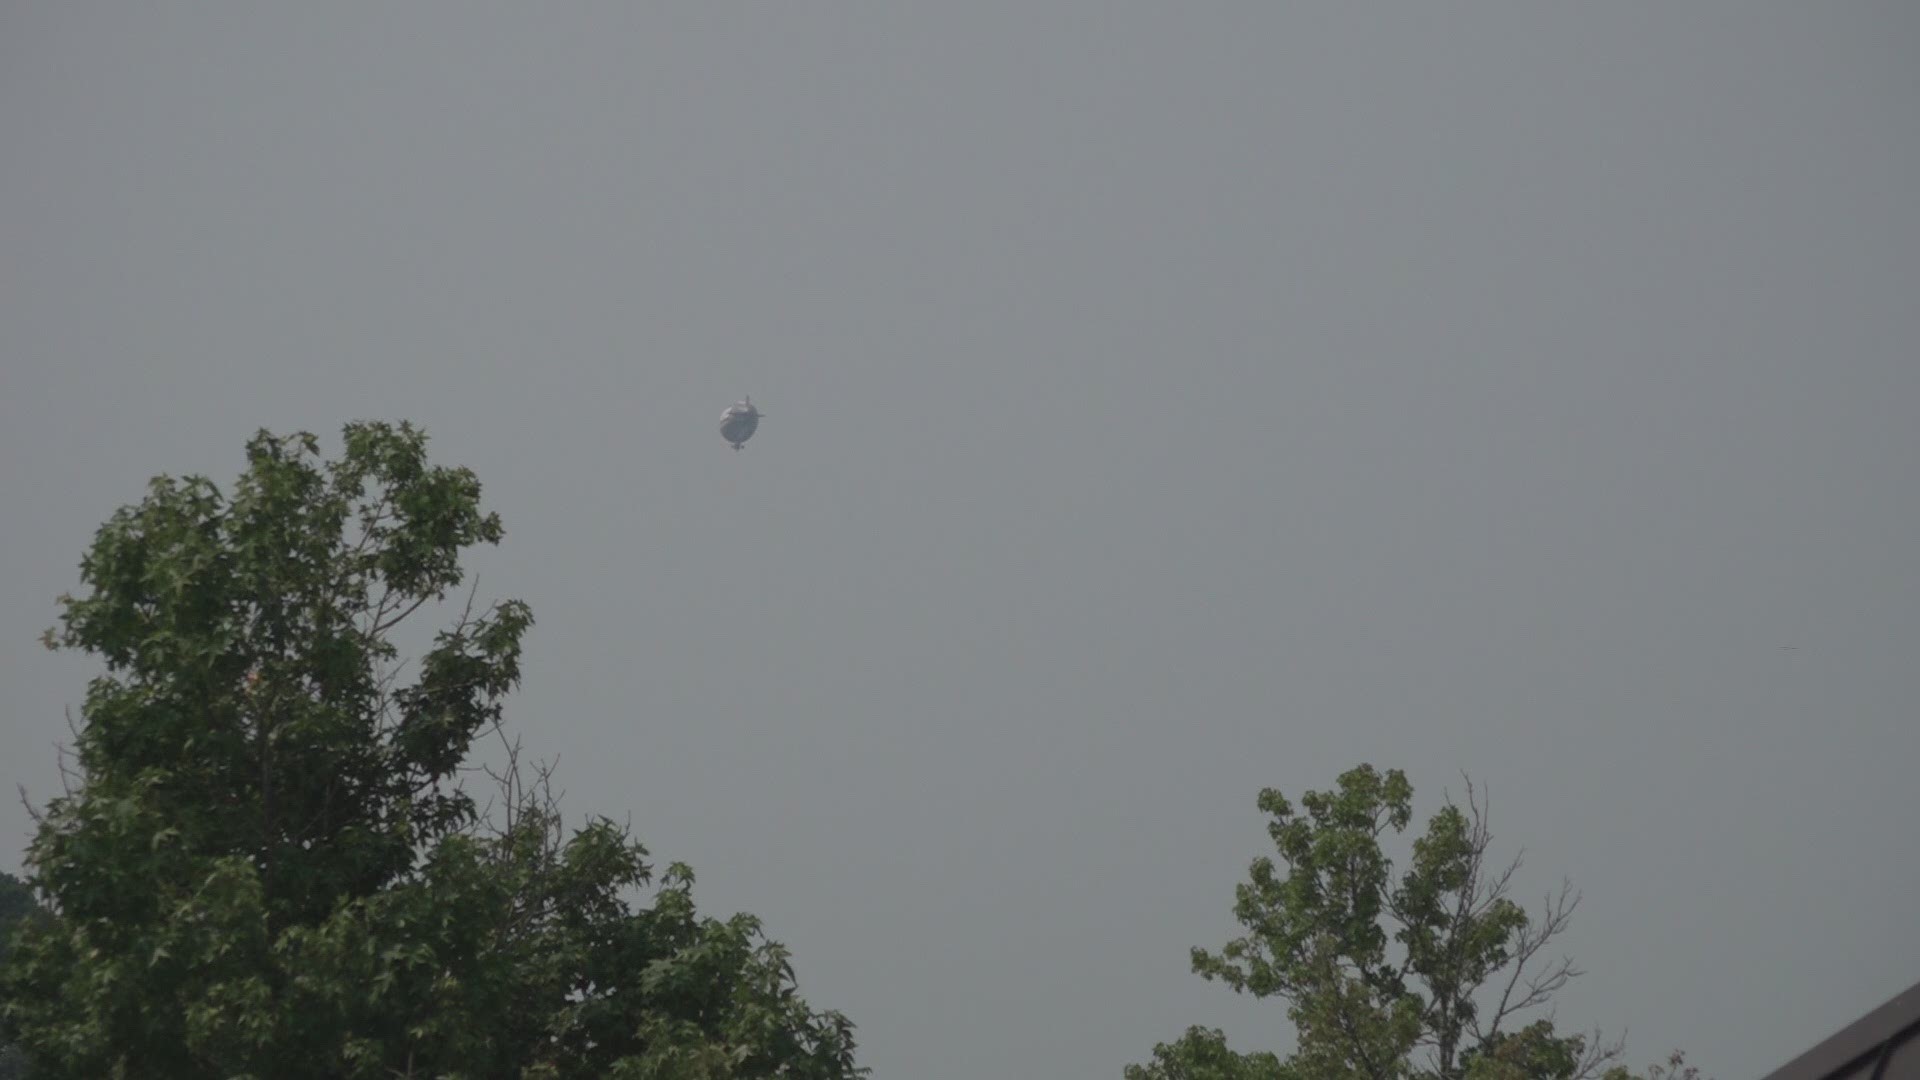 The blimp is flying across East Coast cities throughout July. It started its journey in Nashville on June 24.